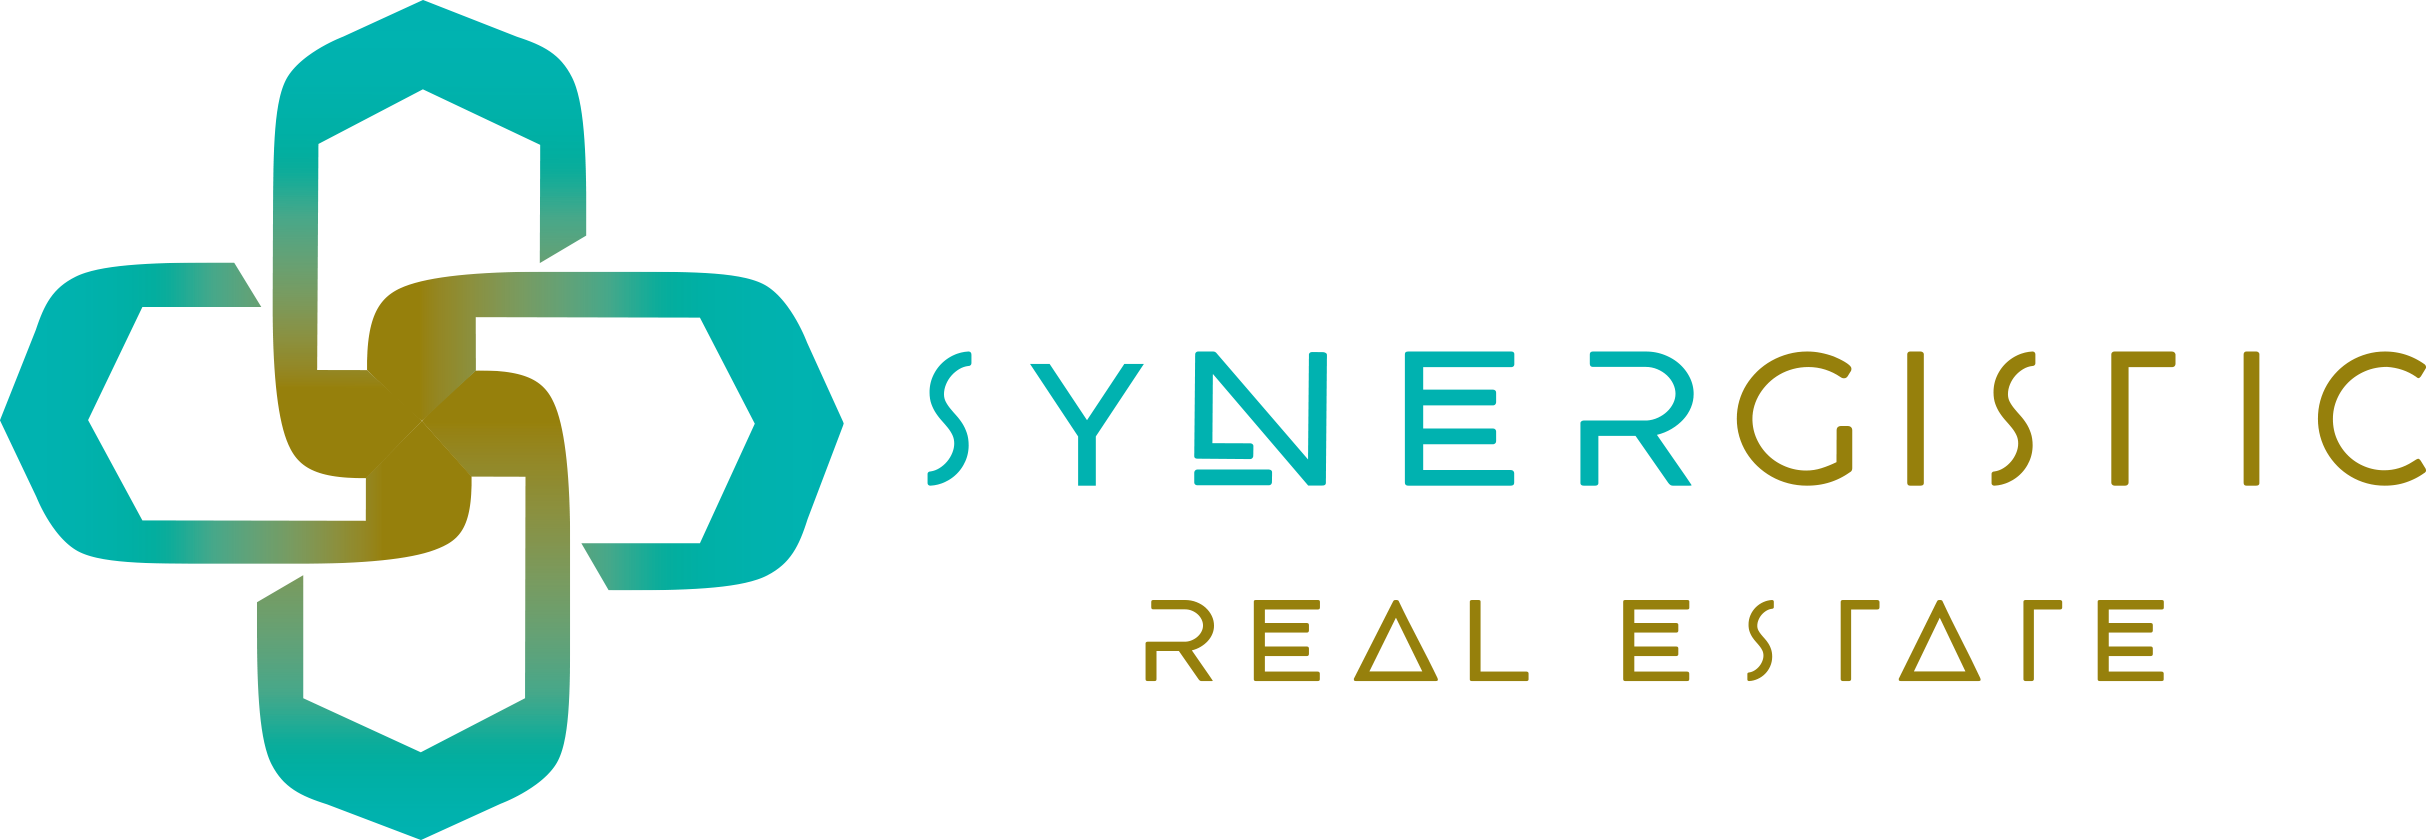 Synergistic Real Estate